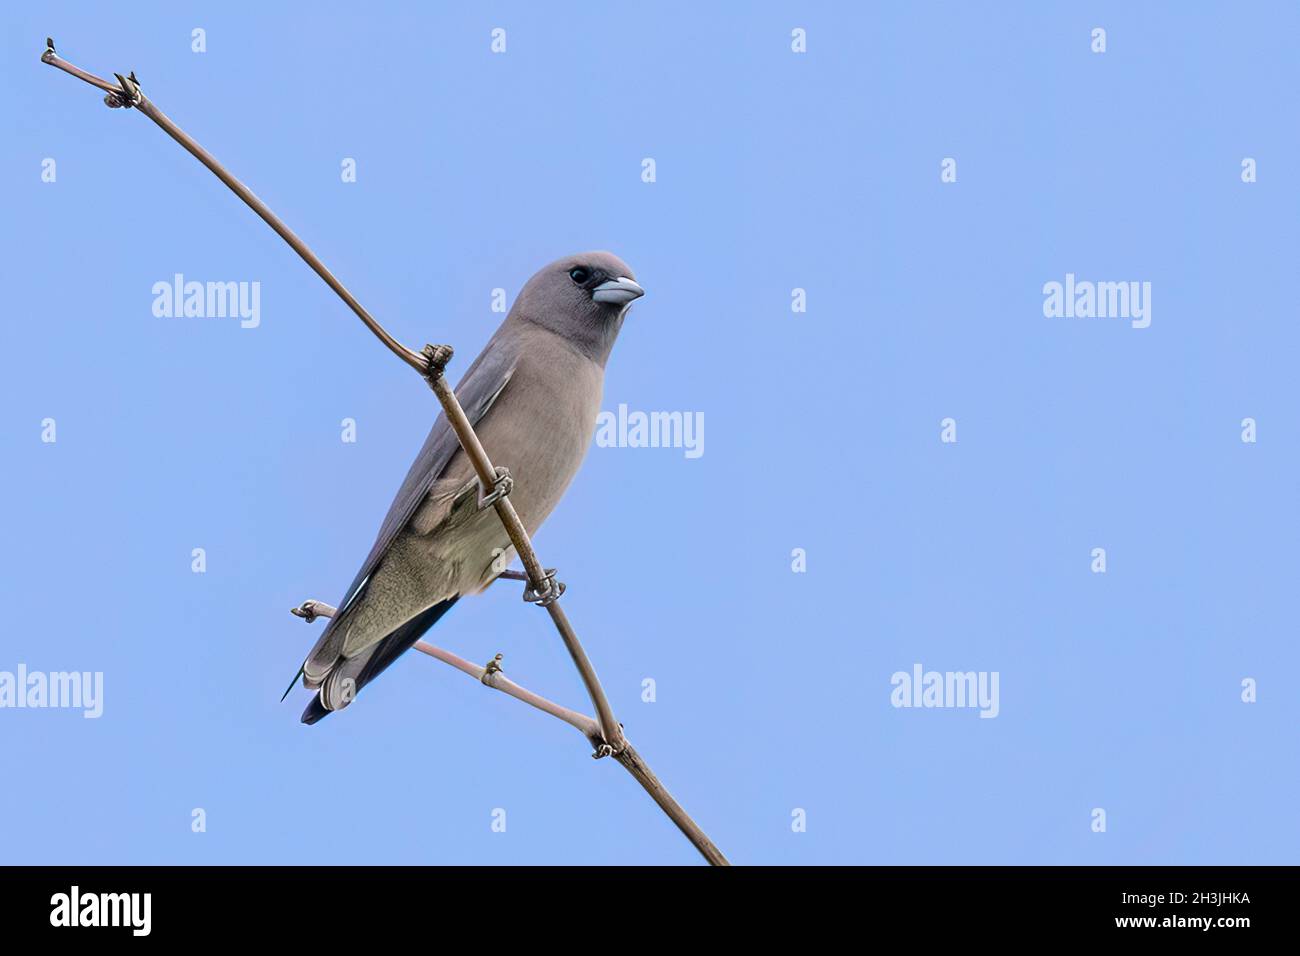 Image of ashy woodswallow ( Artamus fuscus) perched on a branch on the blue sky background Stock Photo